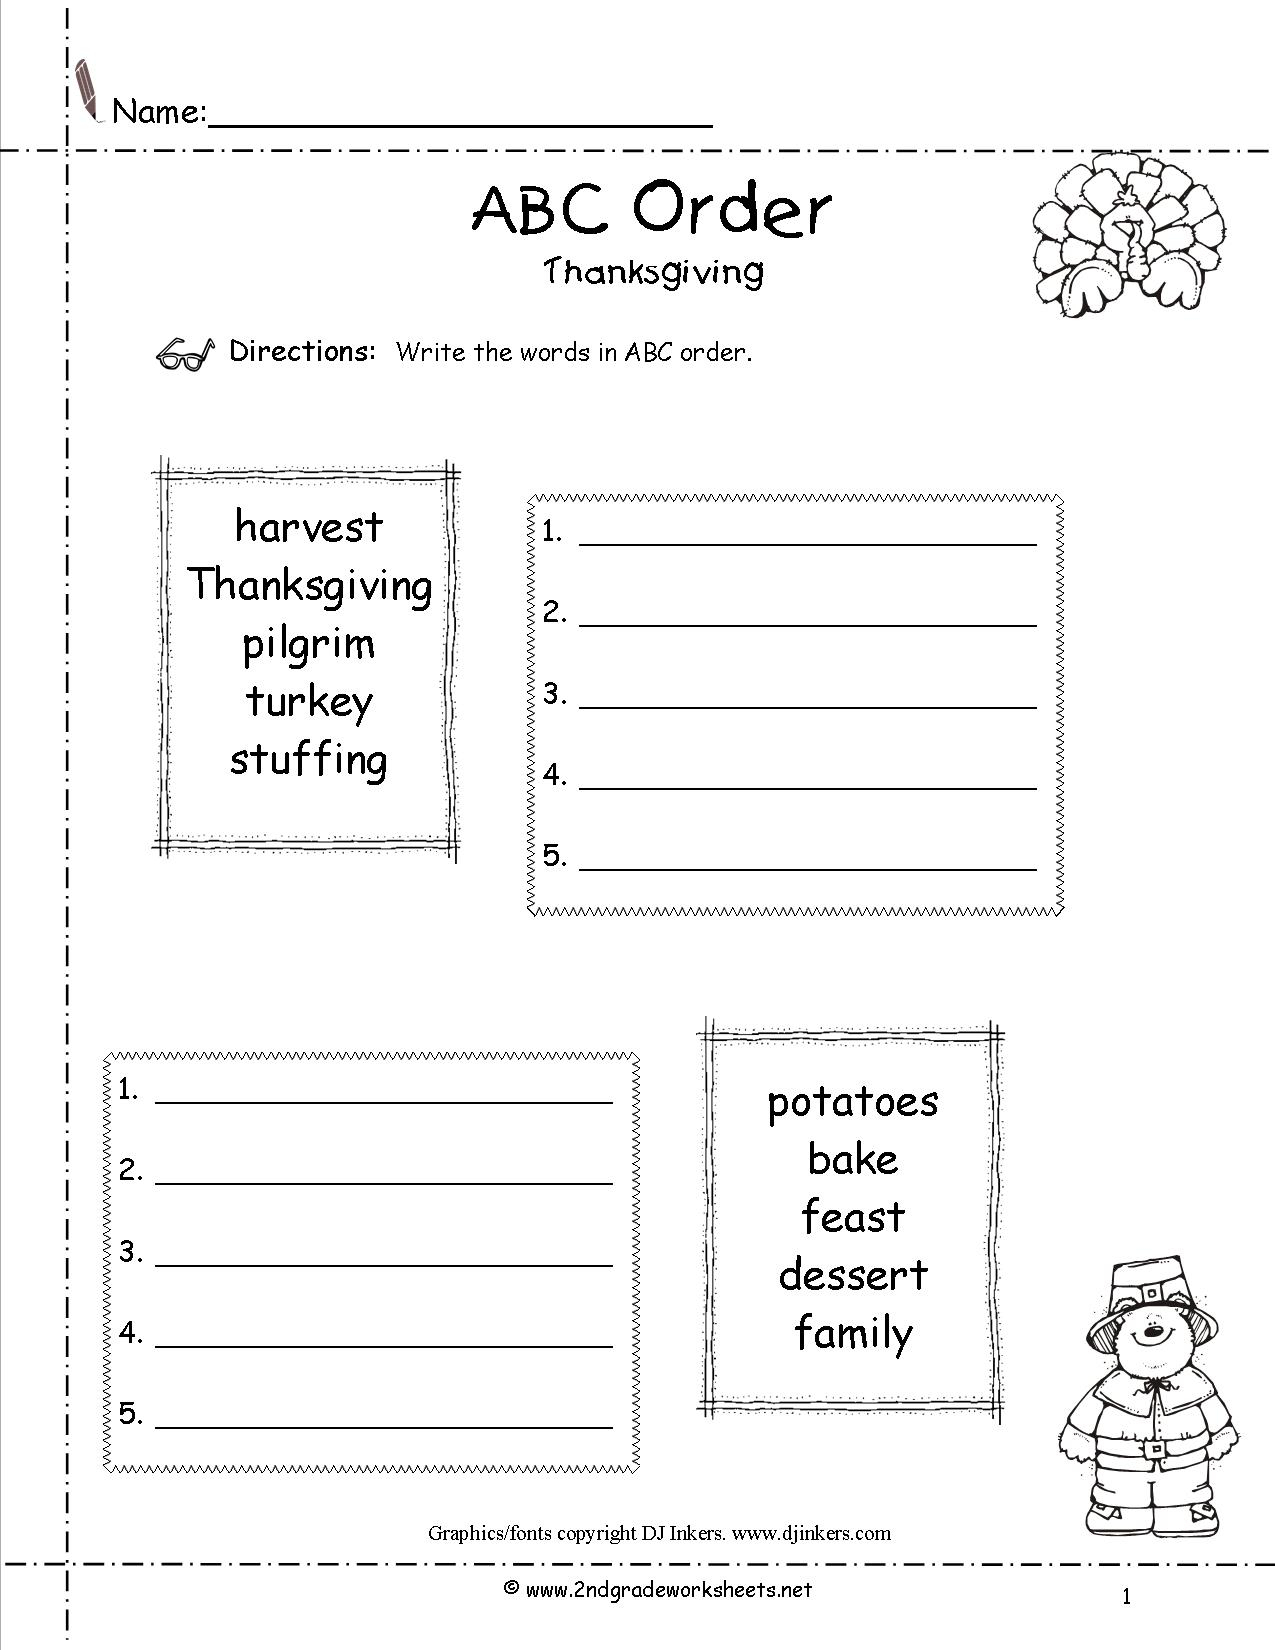 Thanksgiving Printouts And Worksheets | Printable Abc Order Worksheets